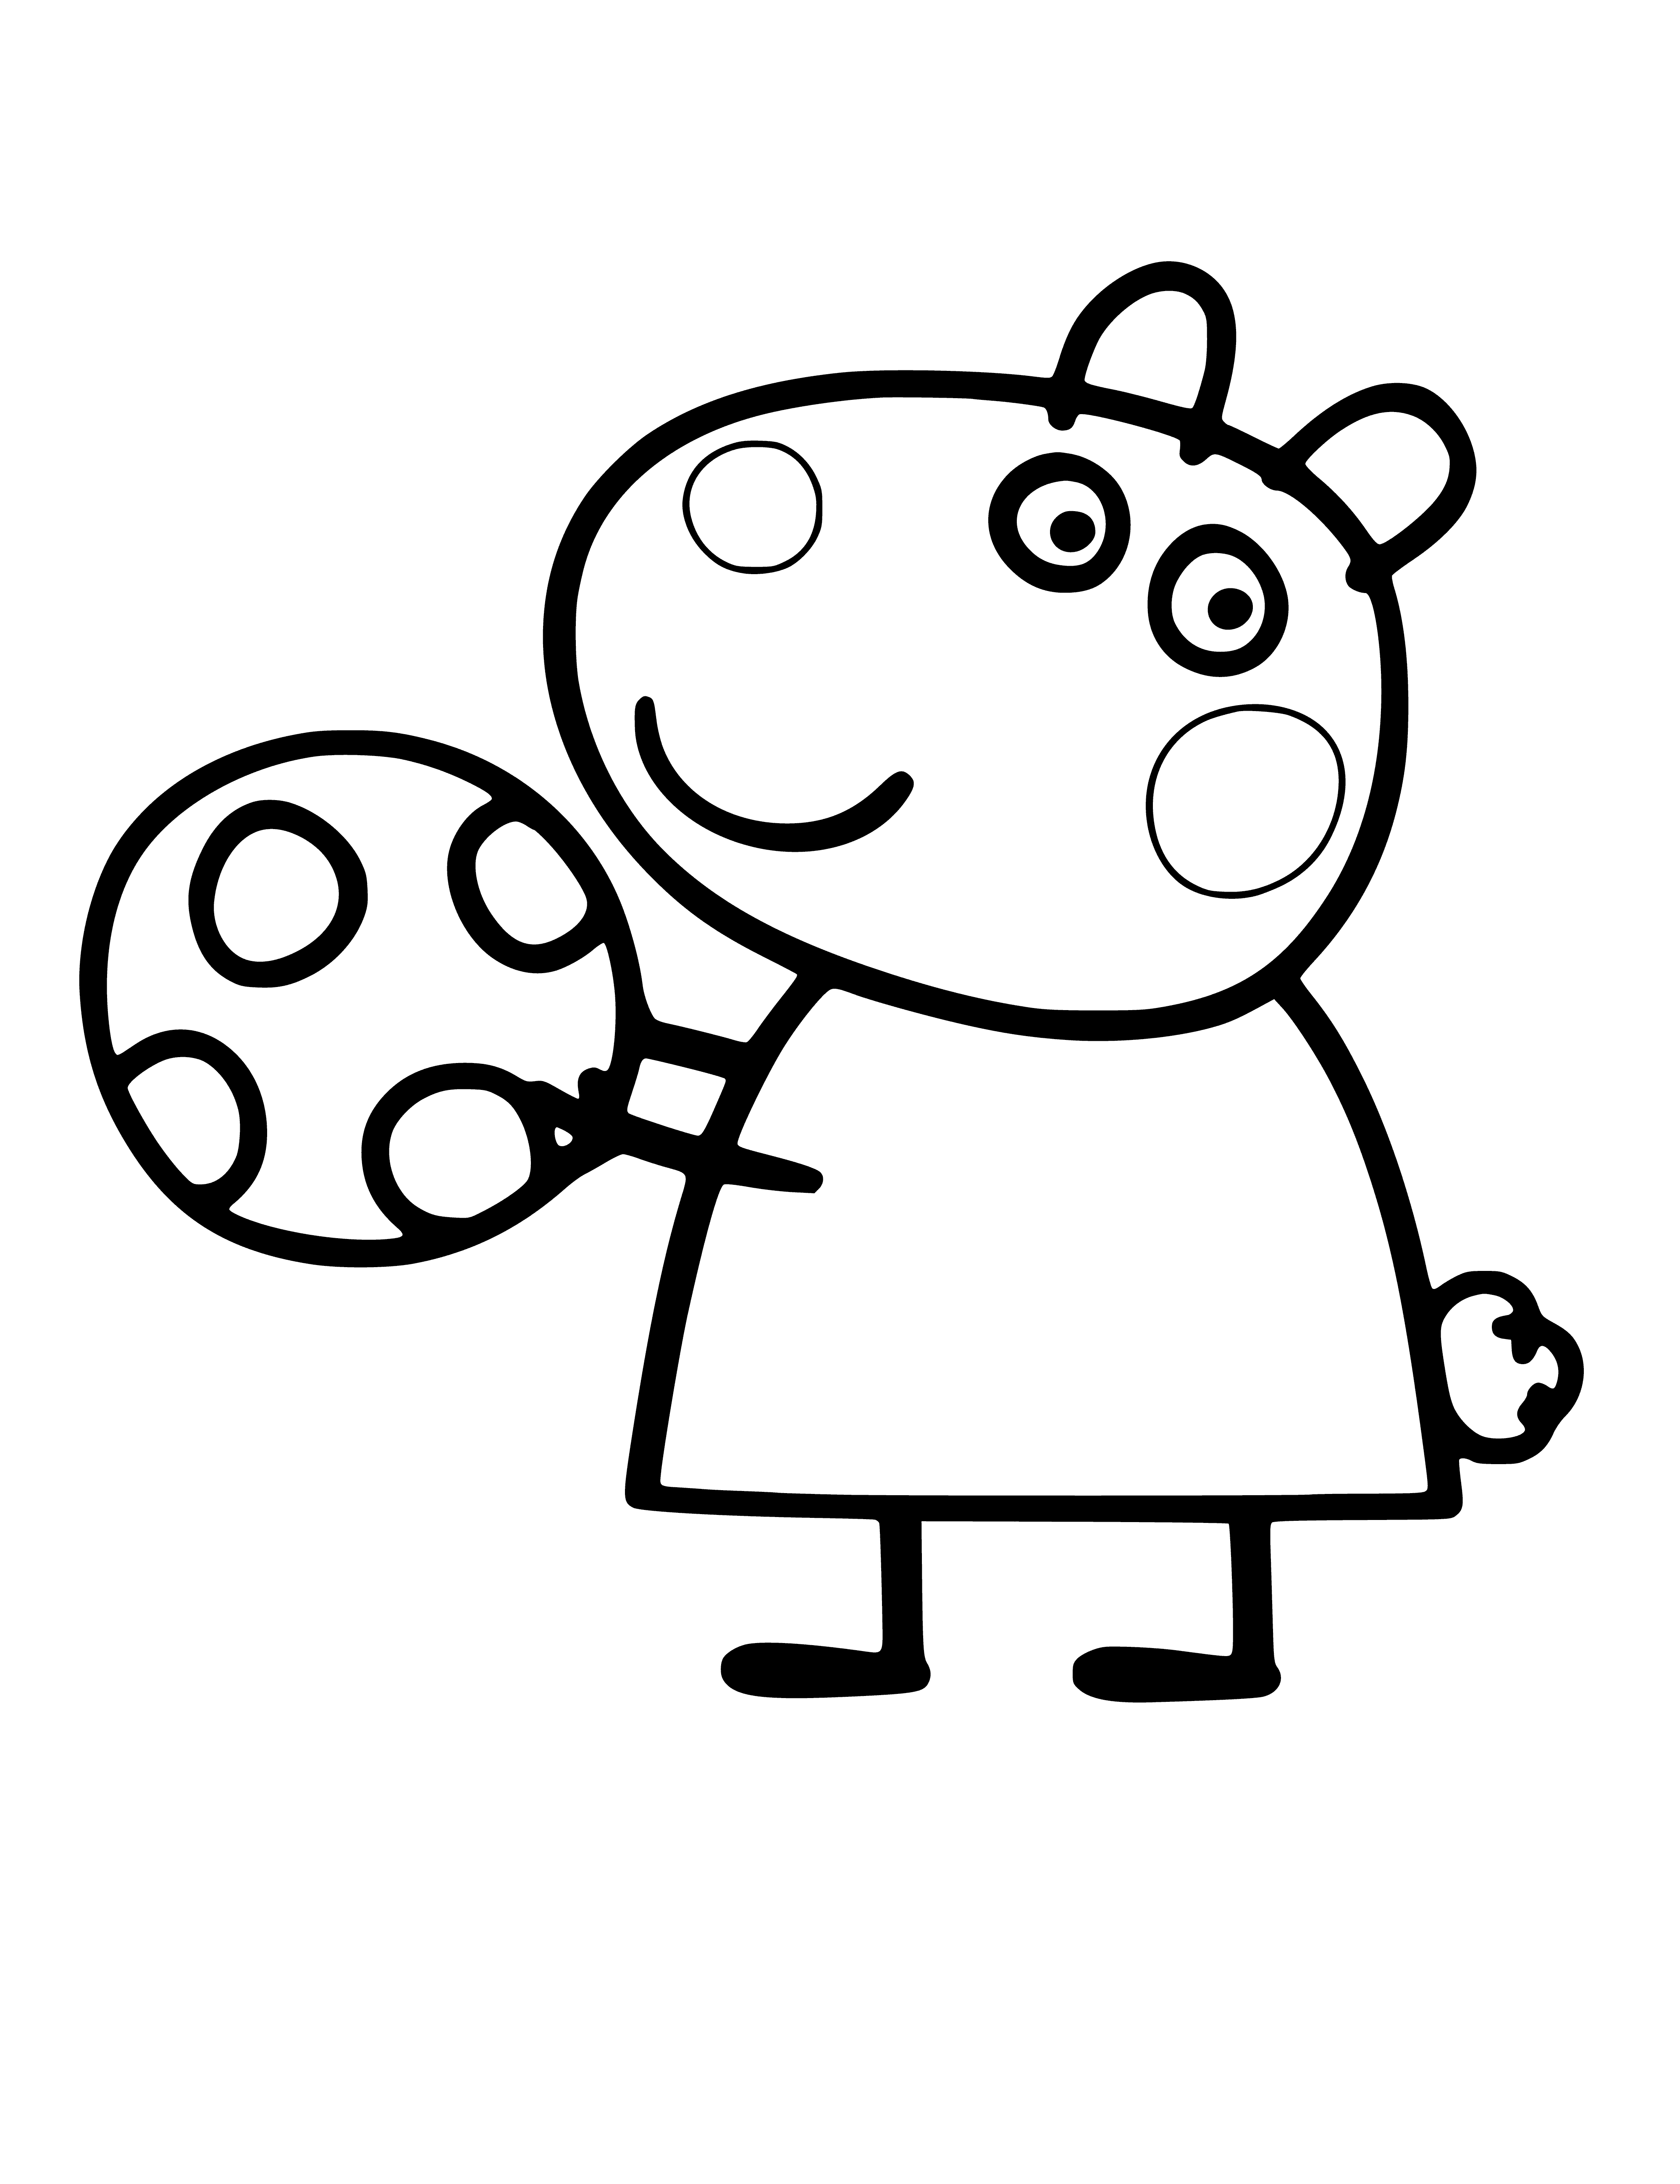 Suzie the Sheep with a ball coloring page